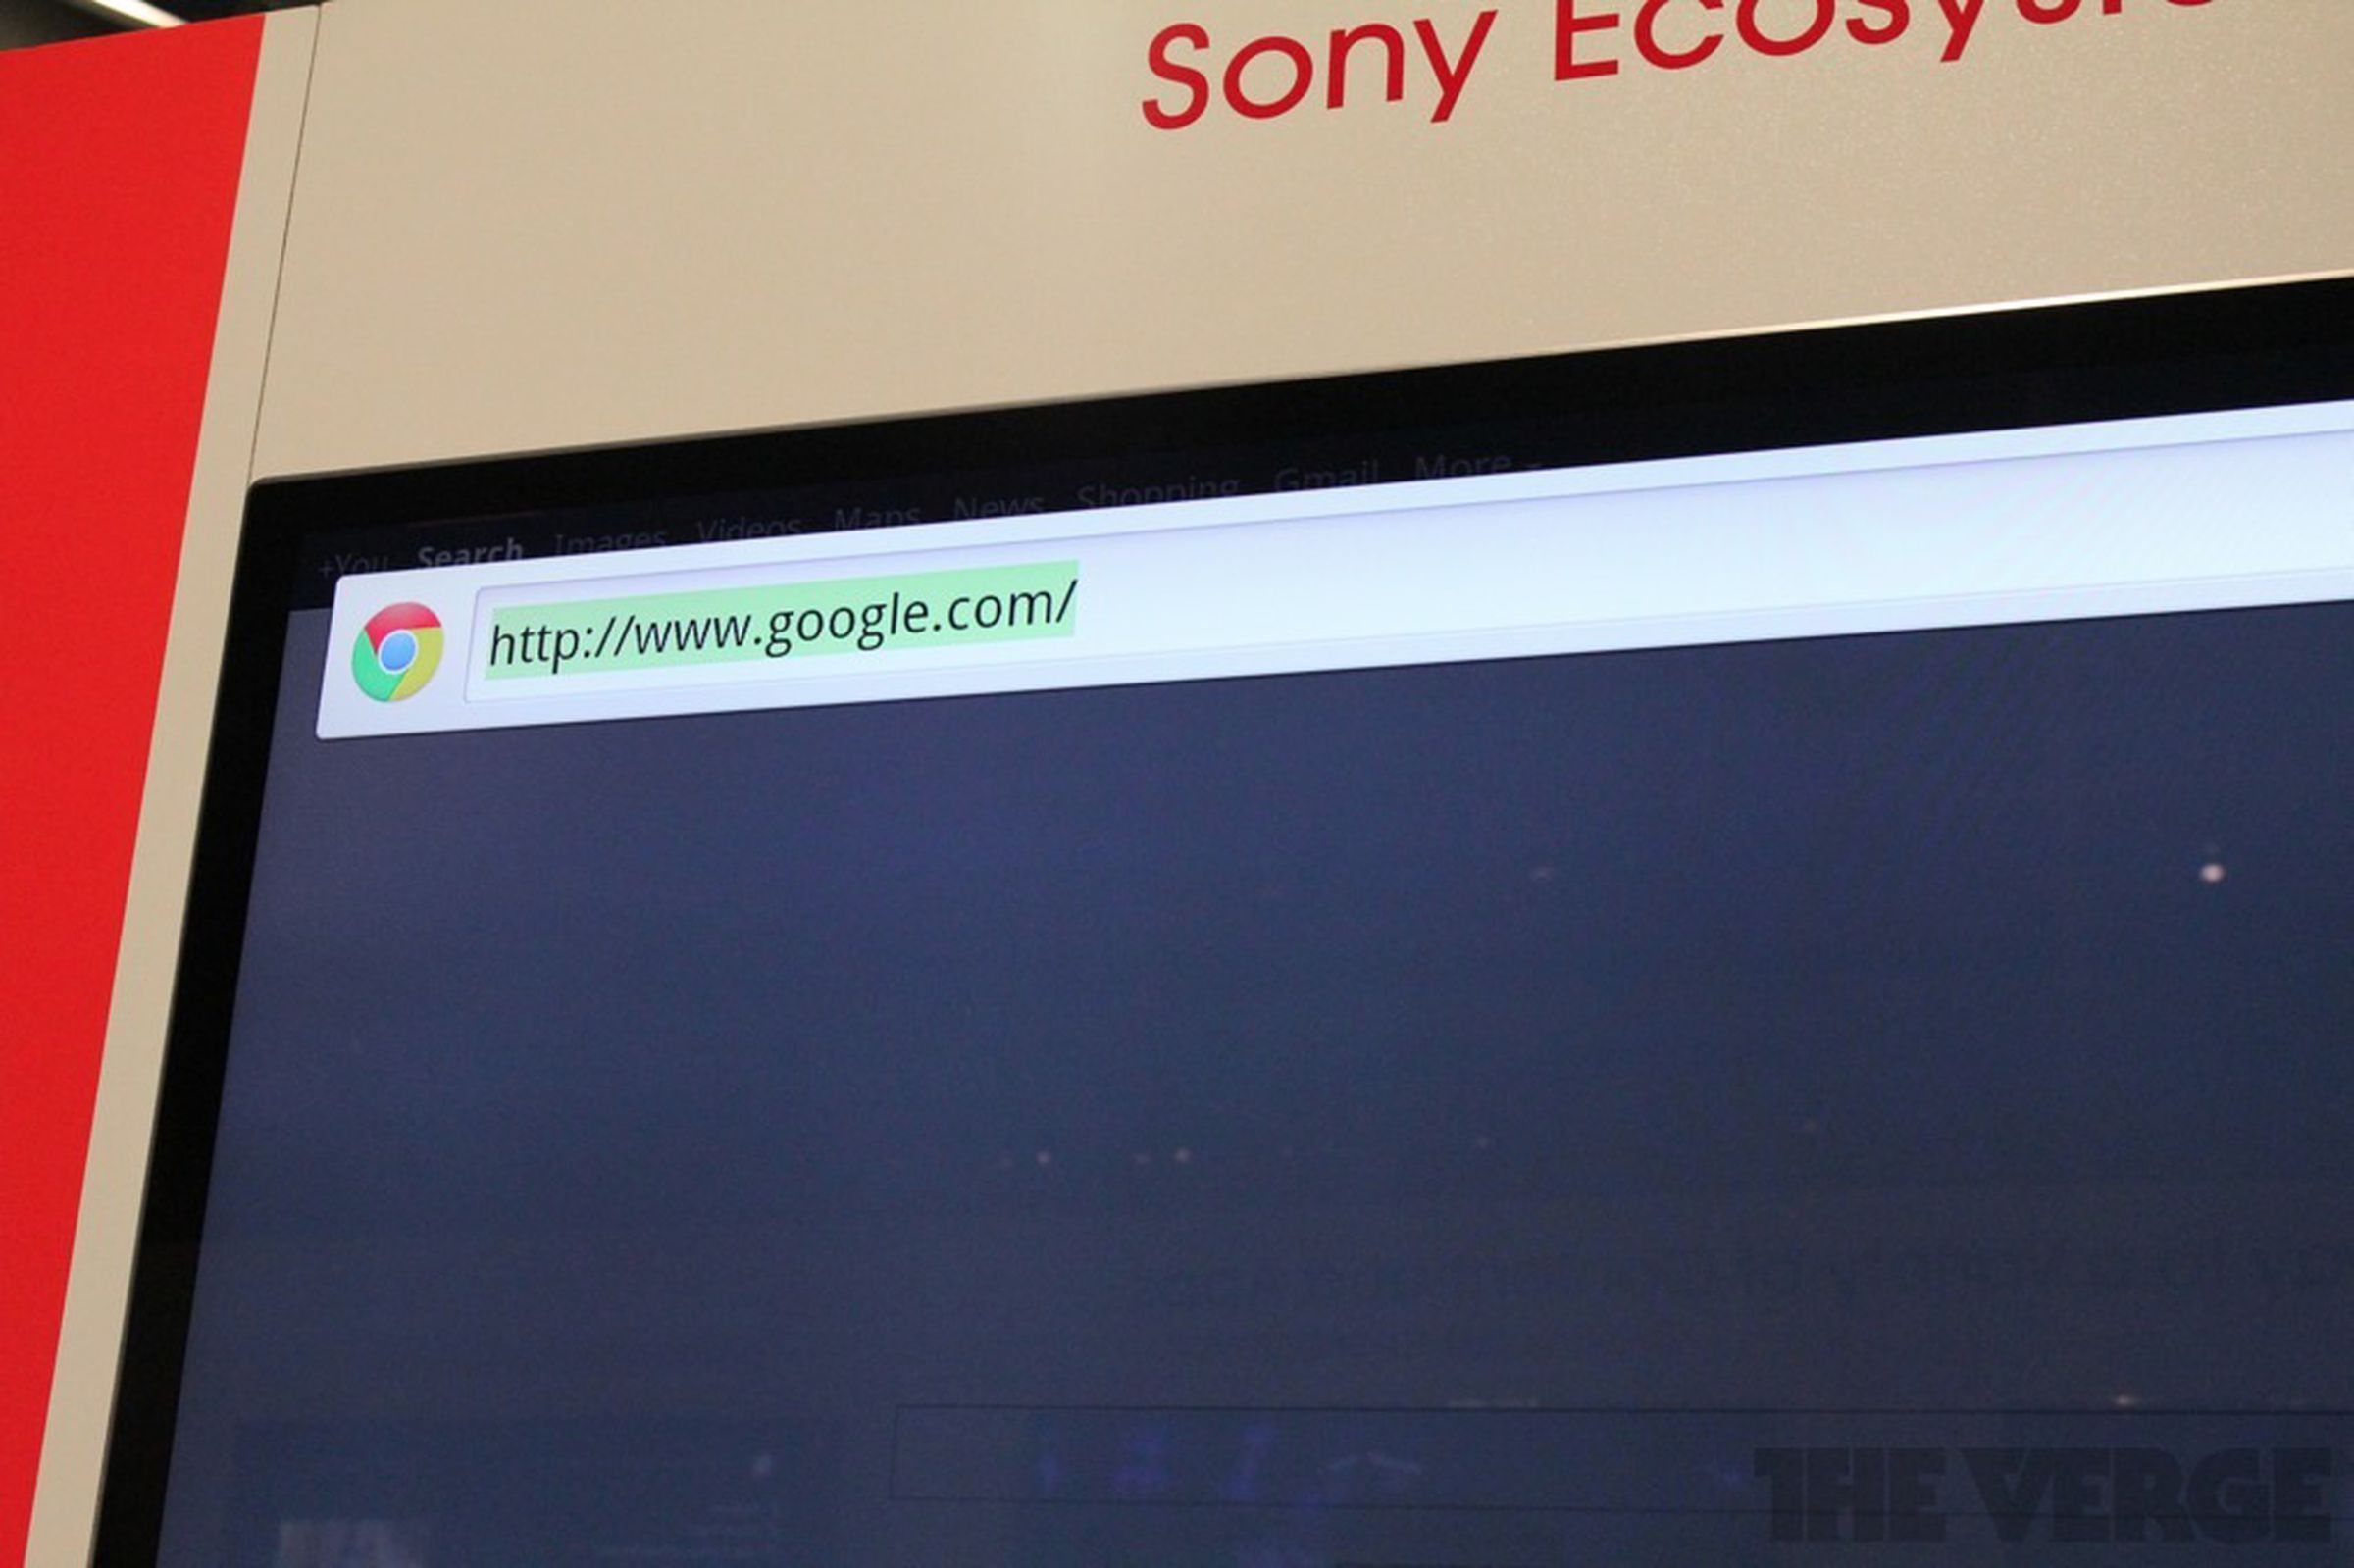 Sony Google TV 2.0 user interface hands-on pictures